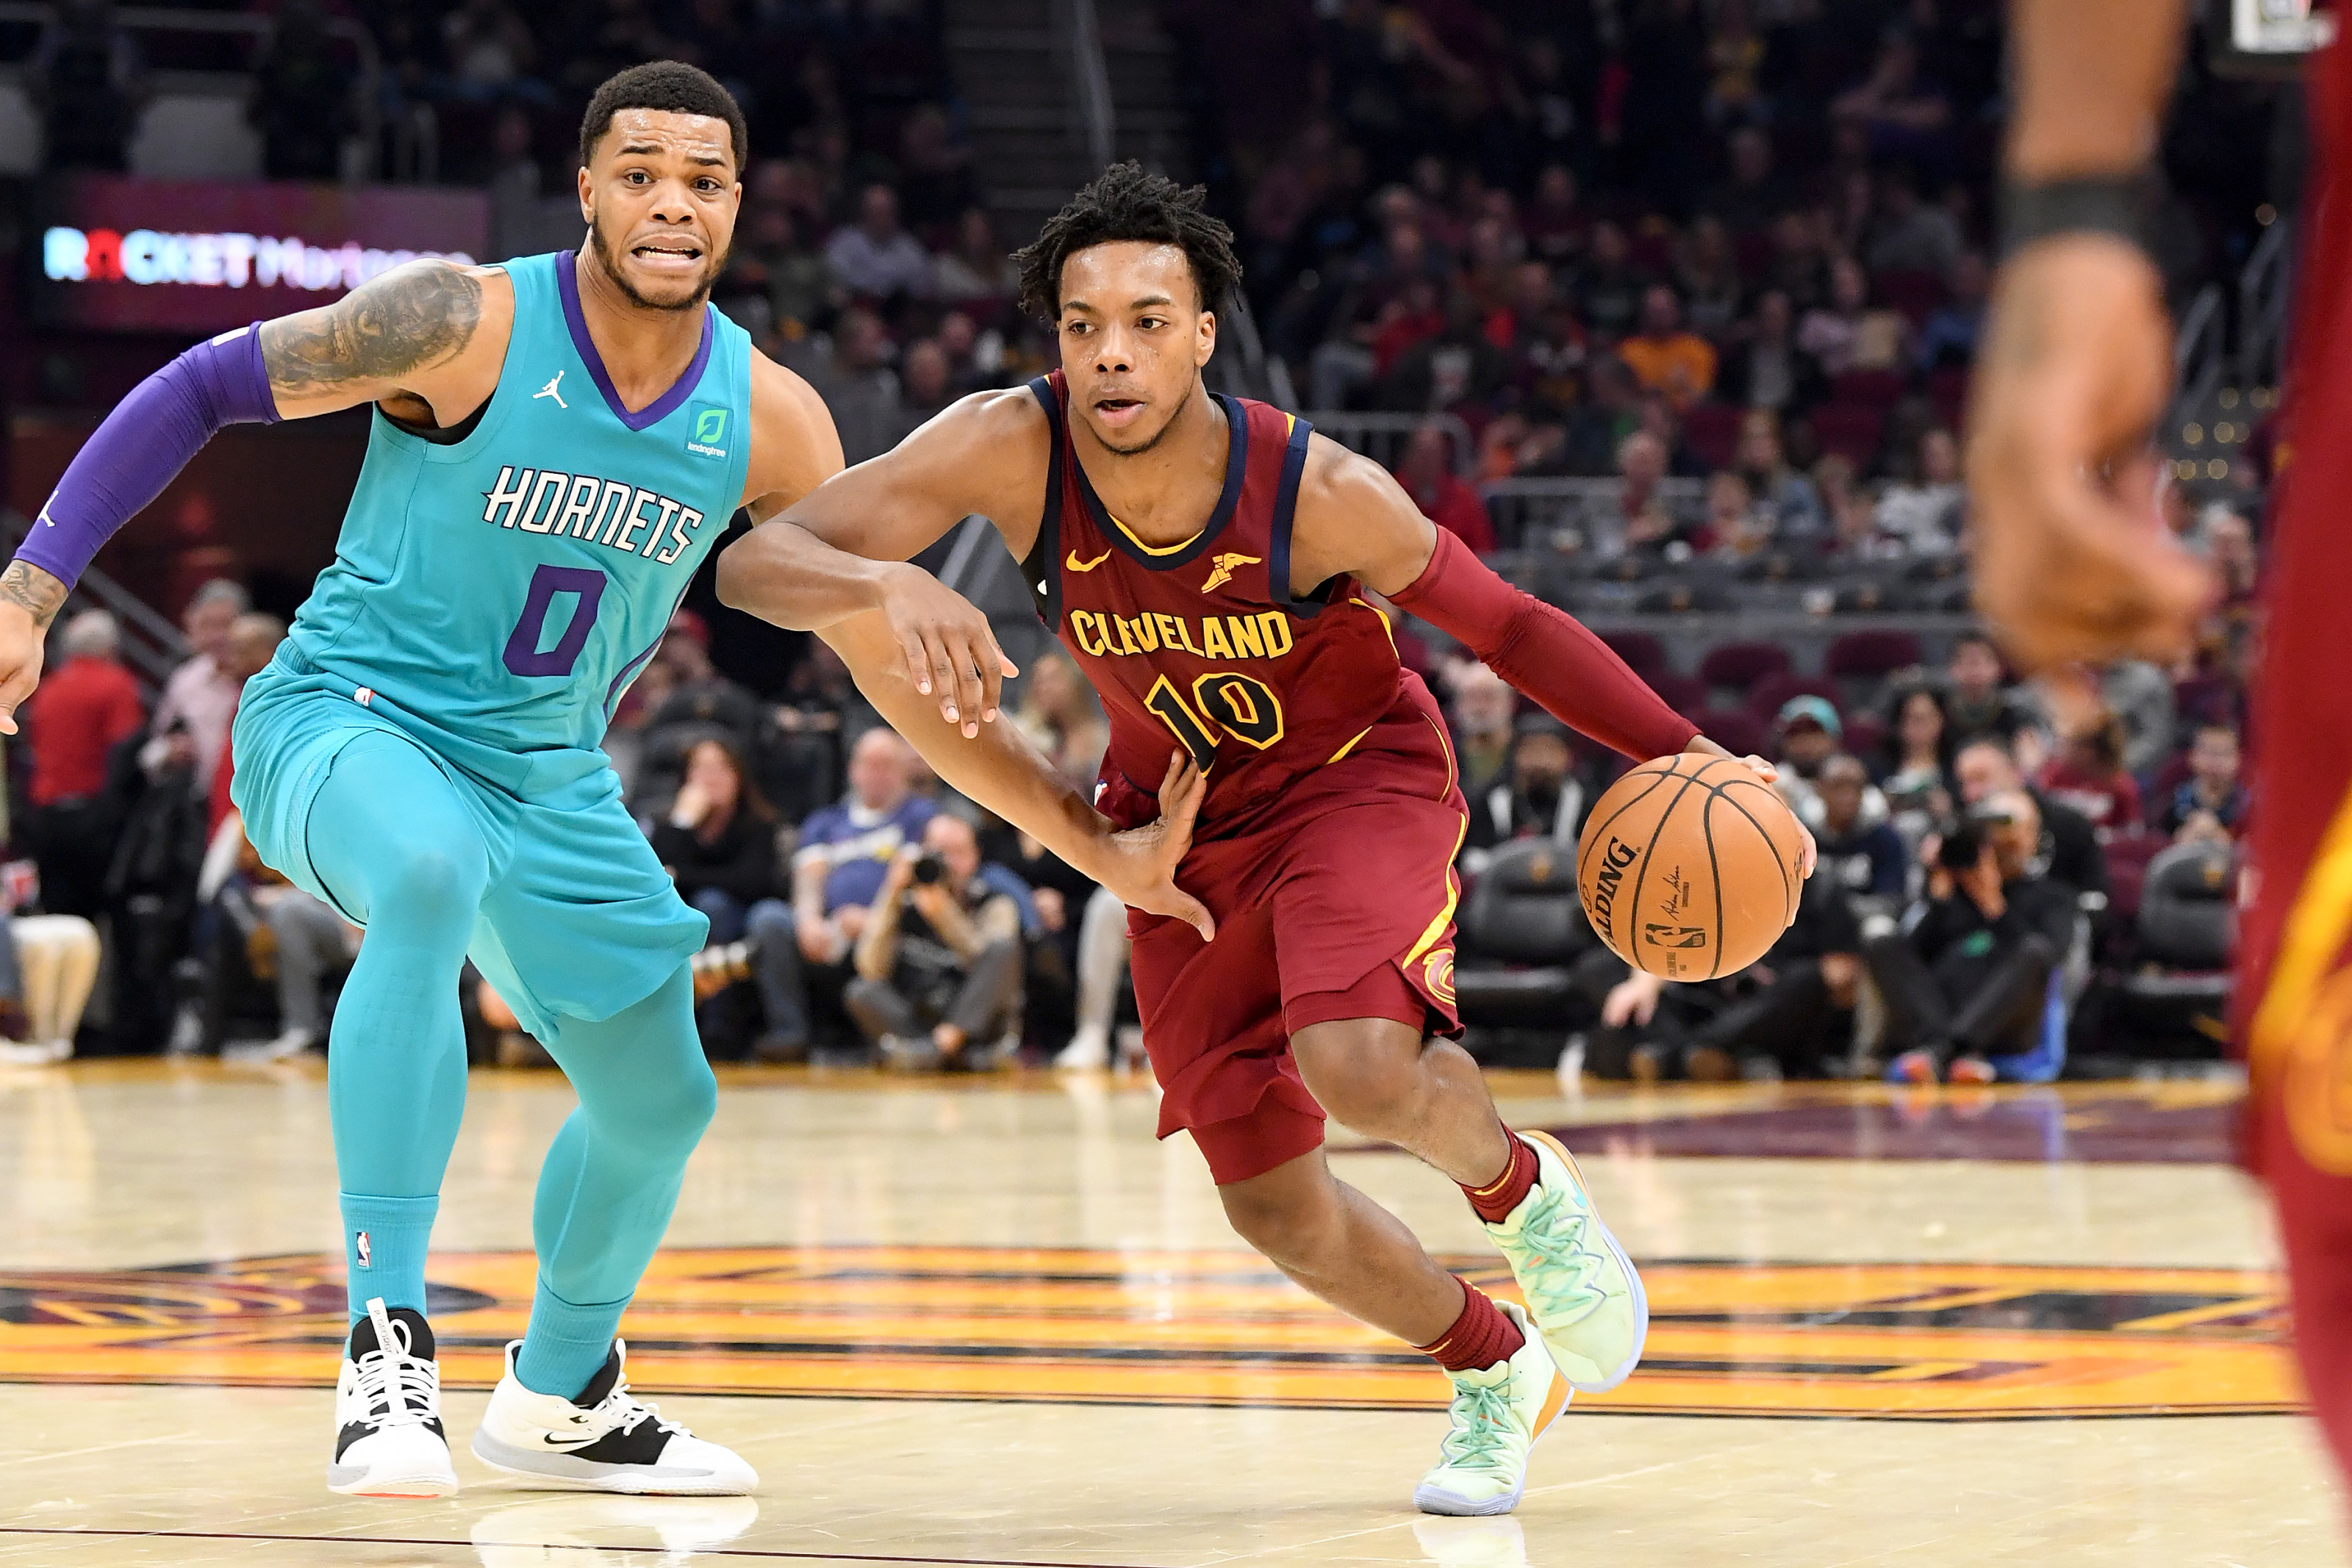 Cavaliers guard Darius Garland out against Hornets due to ongoing